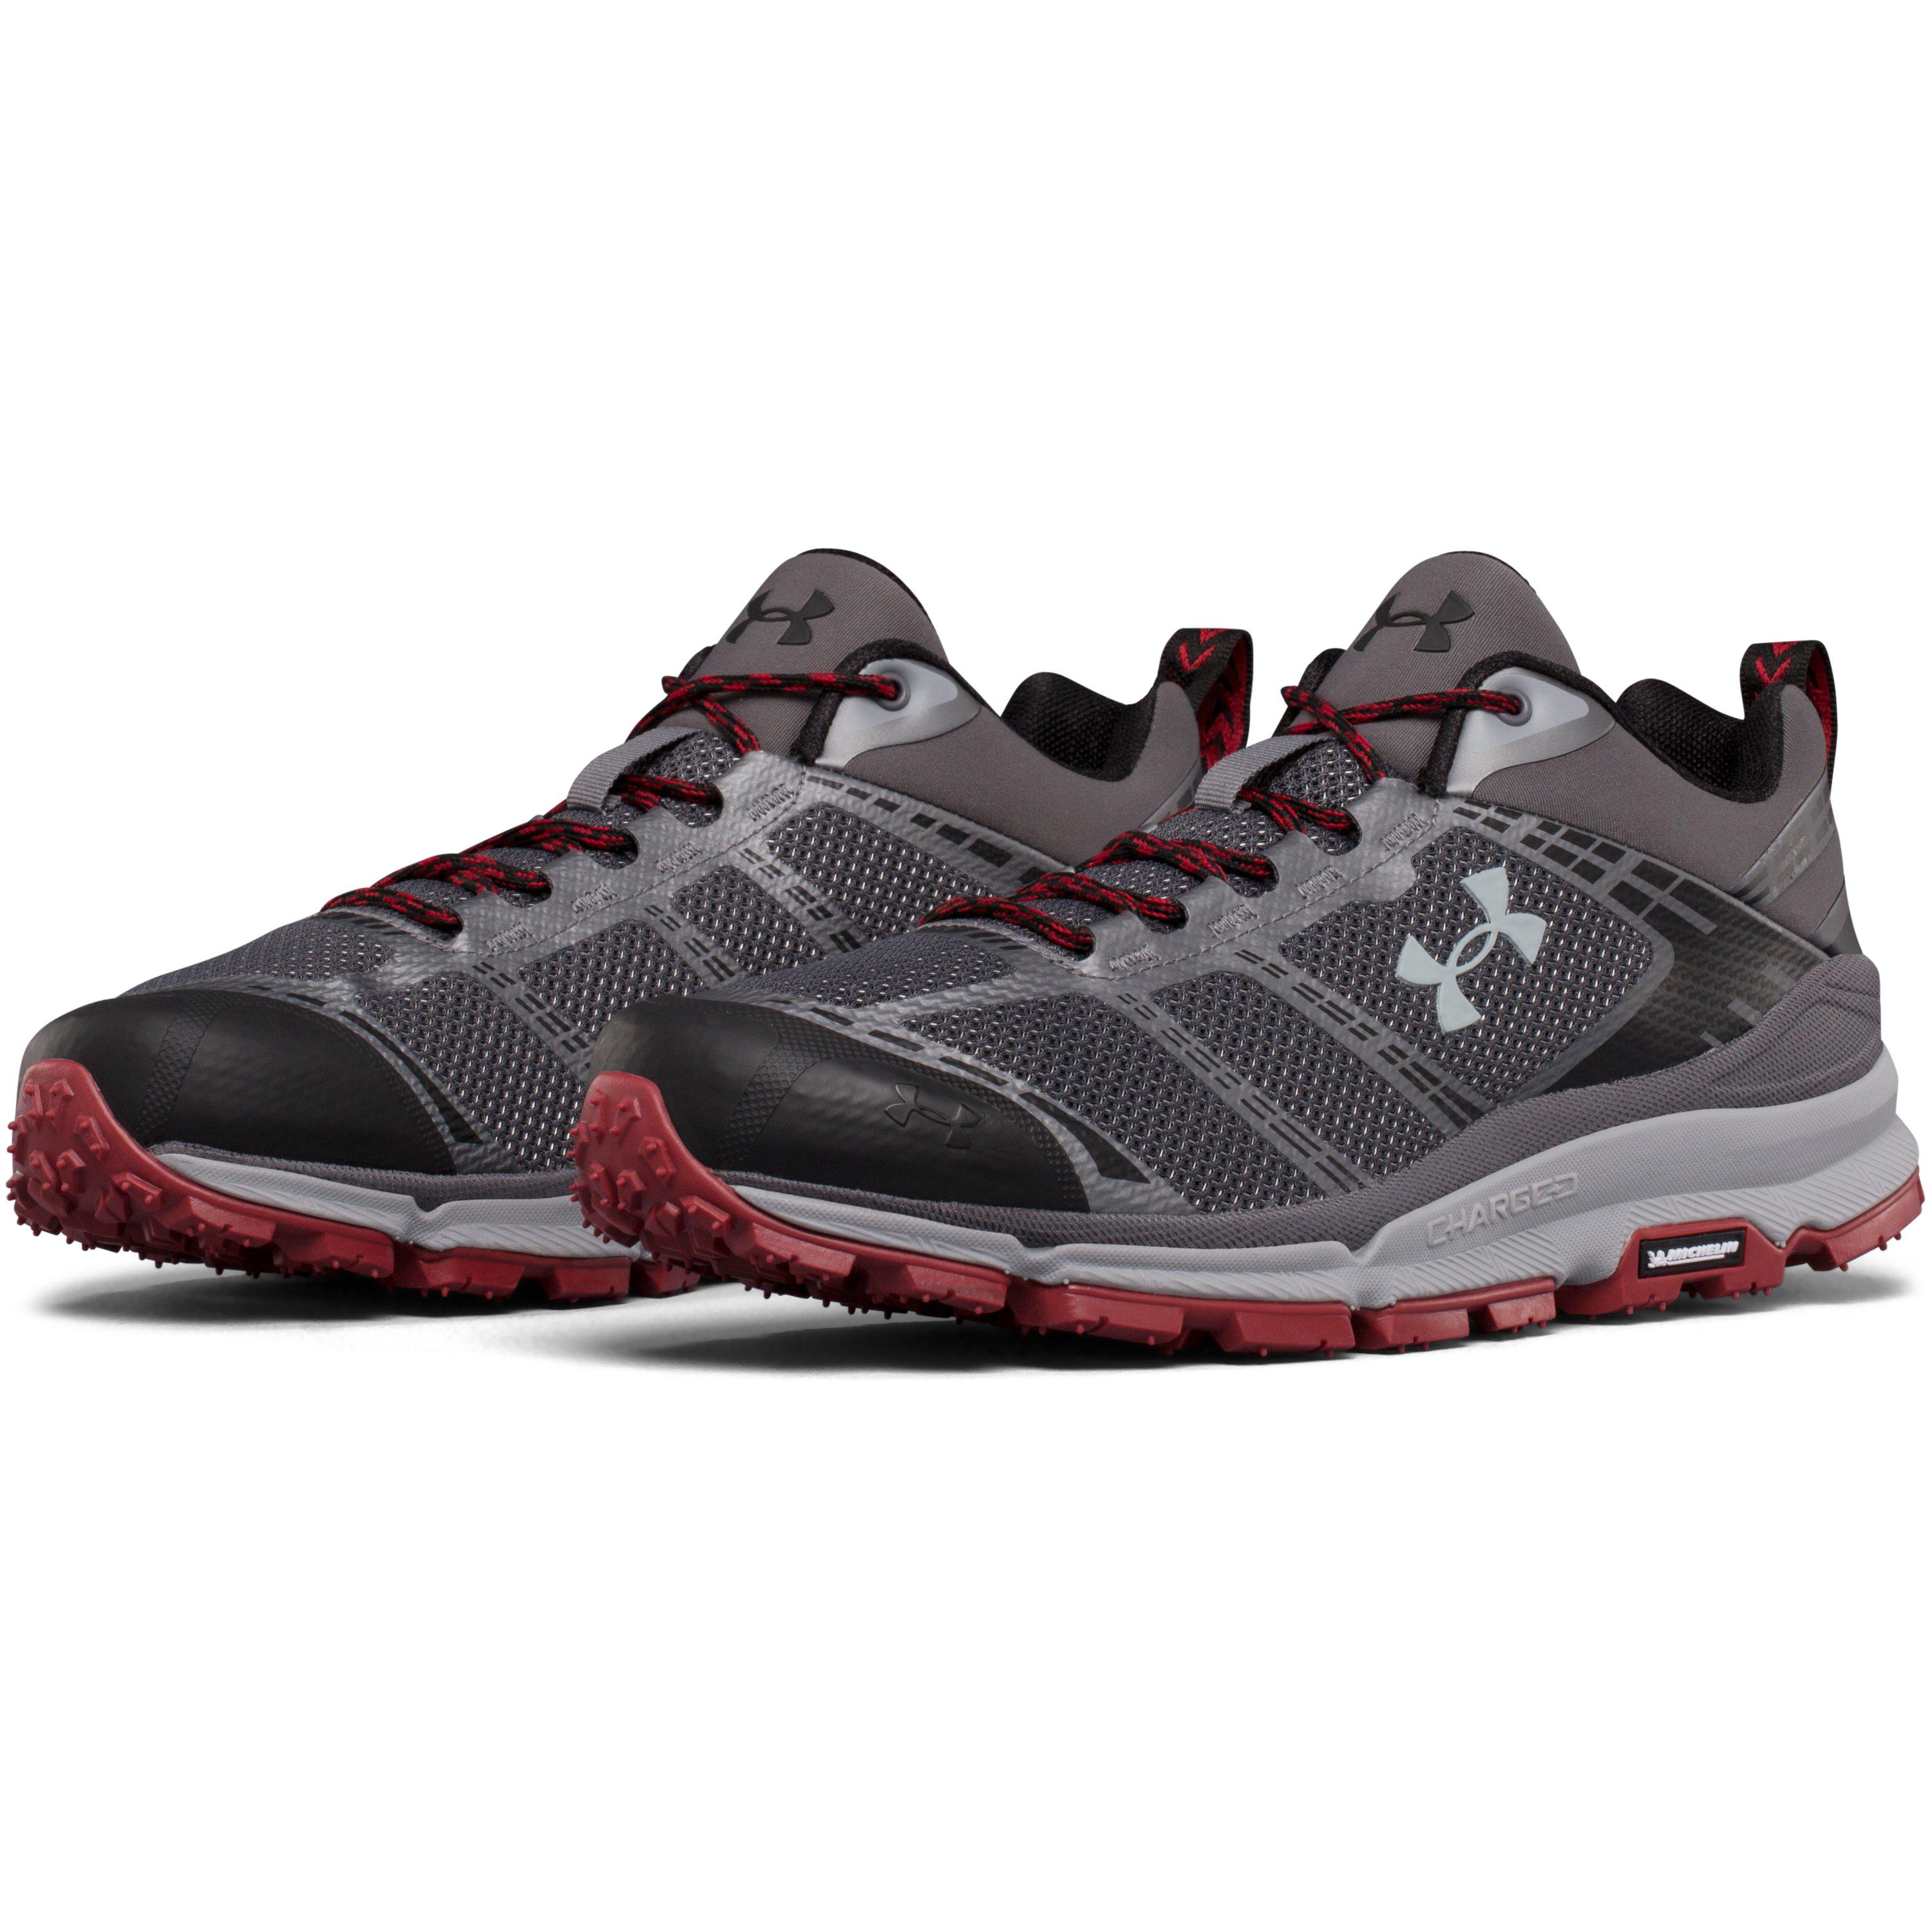 Under Armour Womens Verge Low Hiking Boot